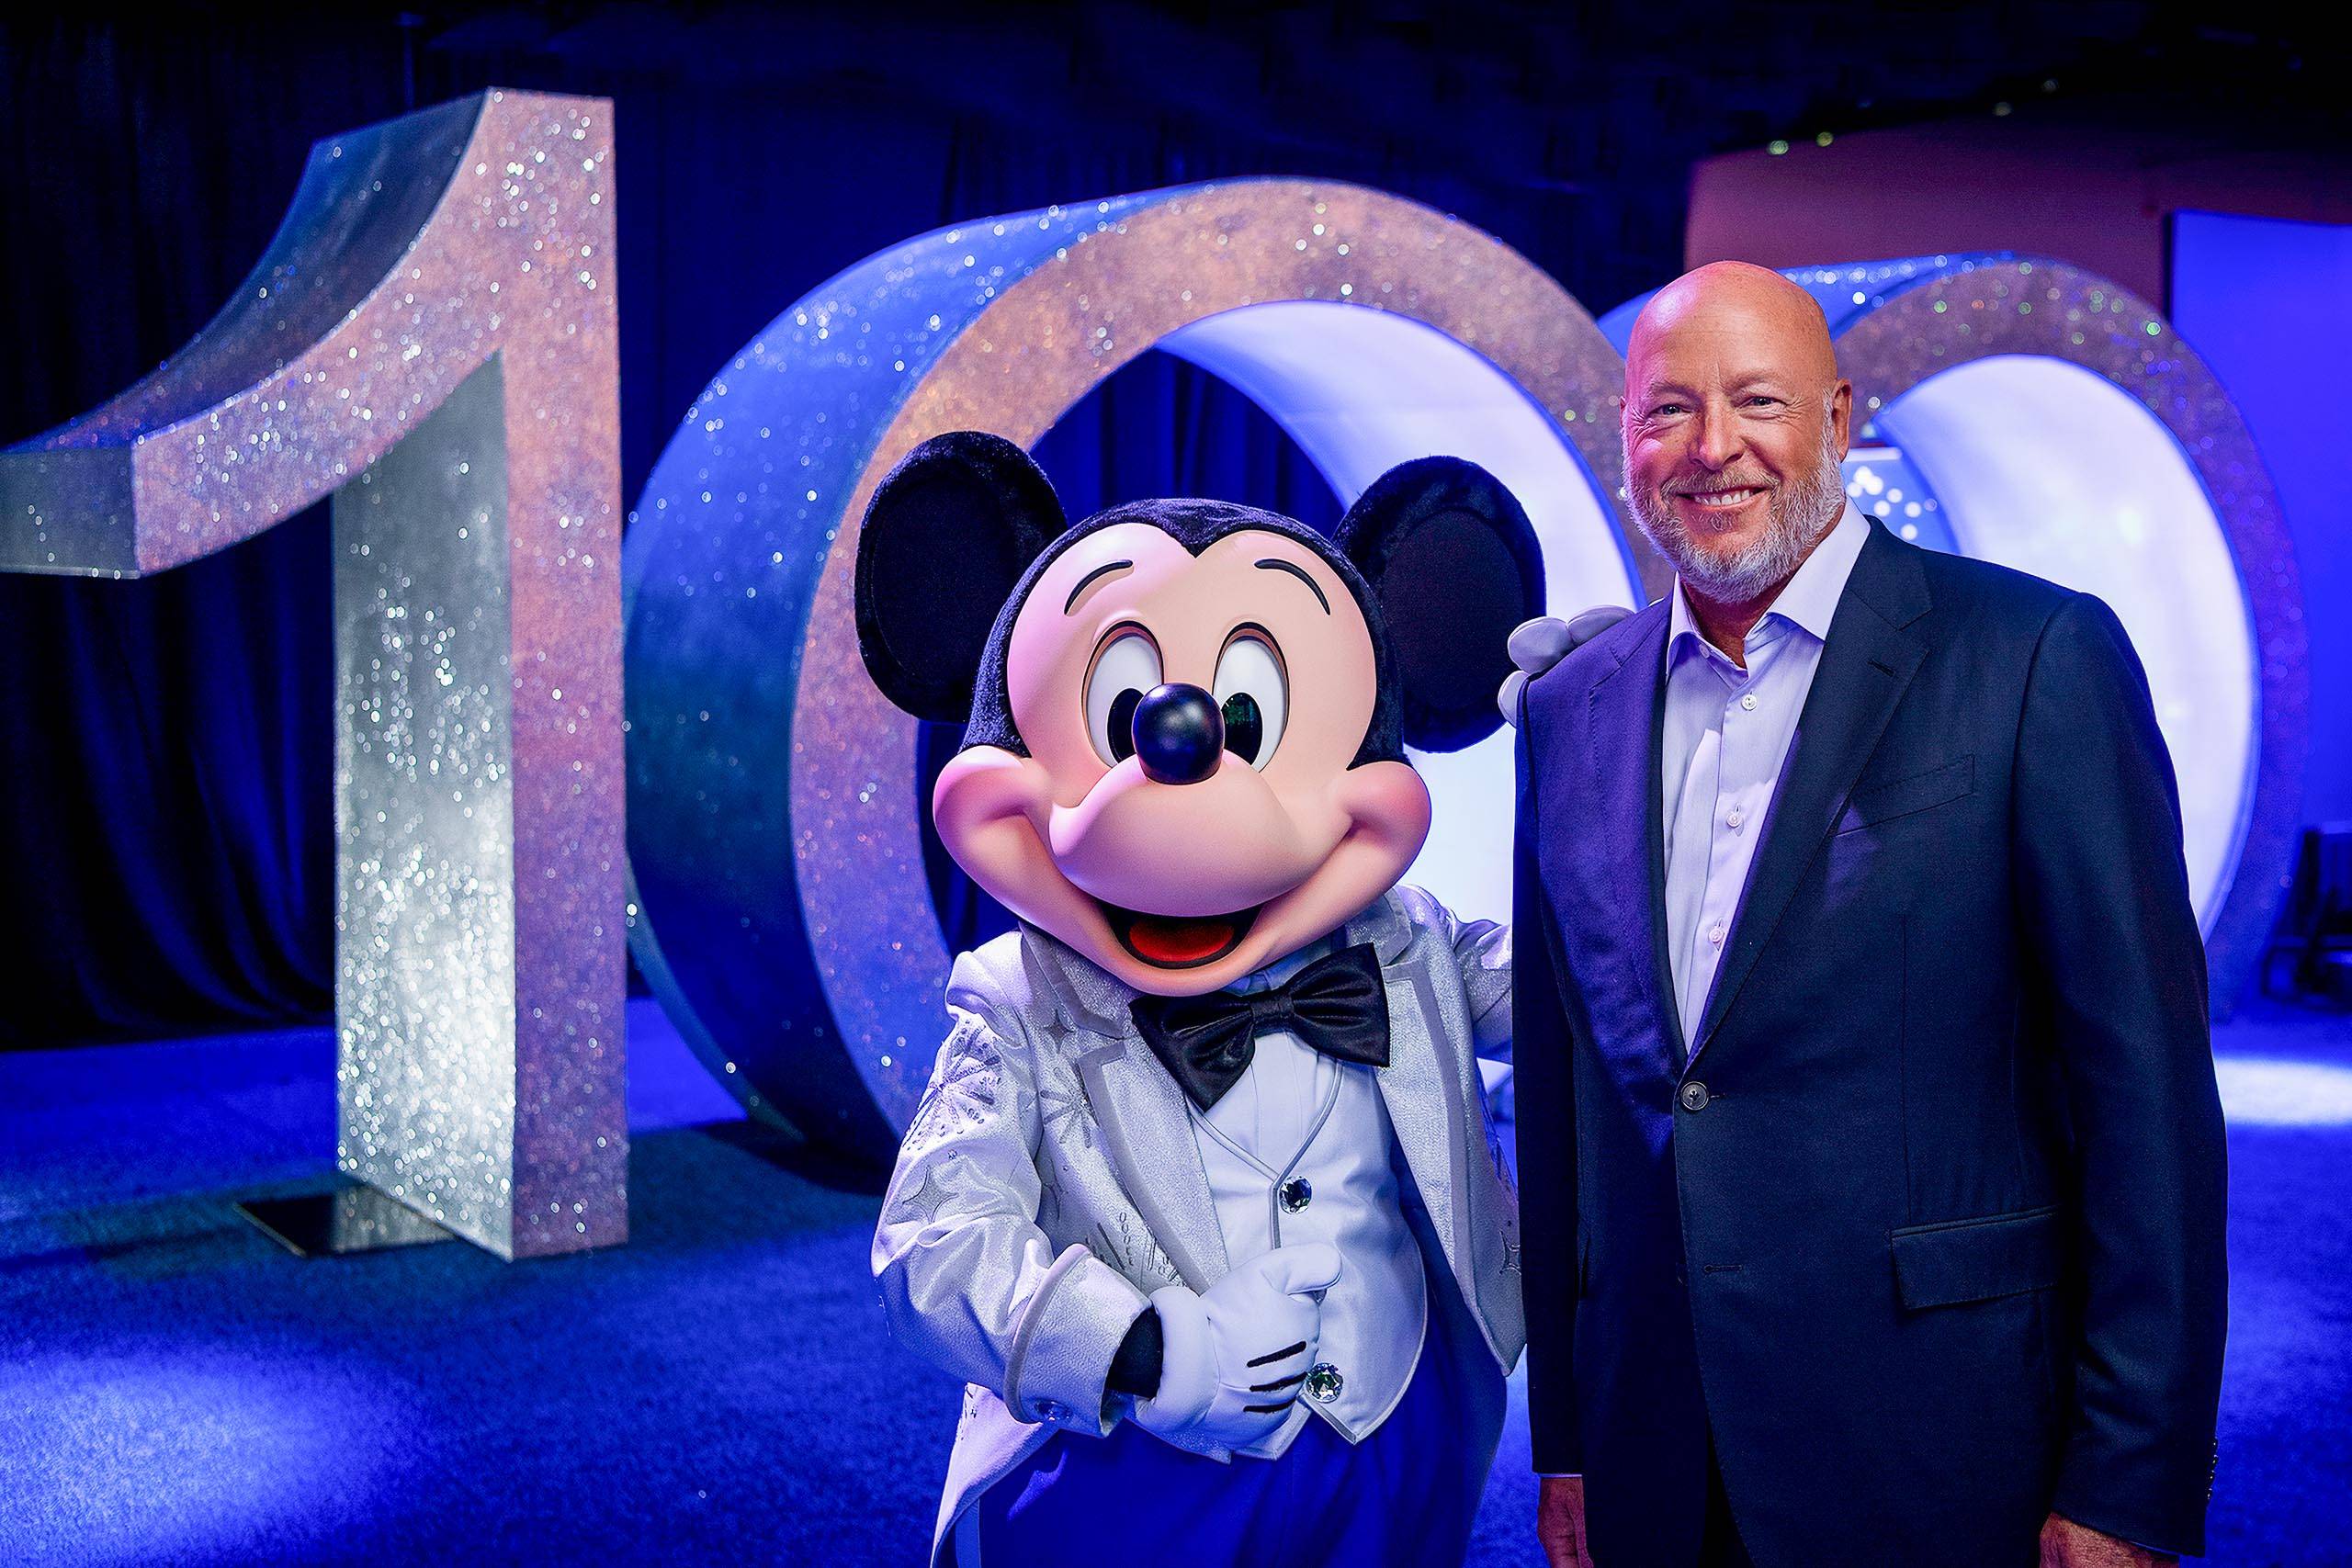 Ousted Disney CEO Bob Chapek shares insights on recent developments at the company